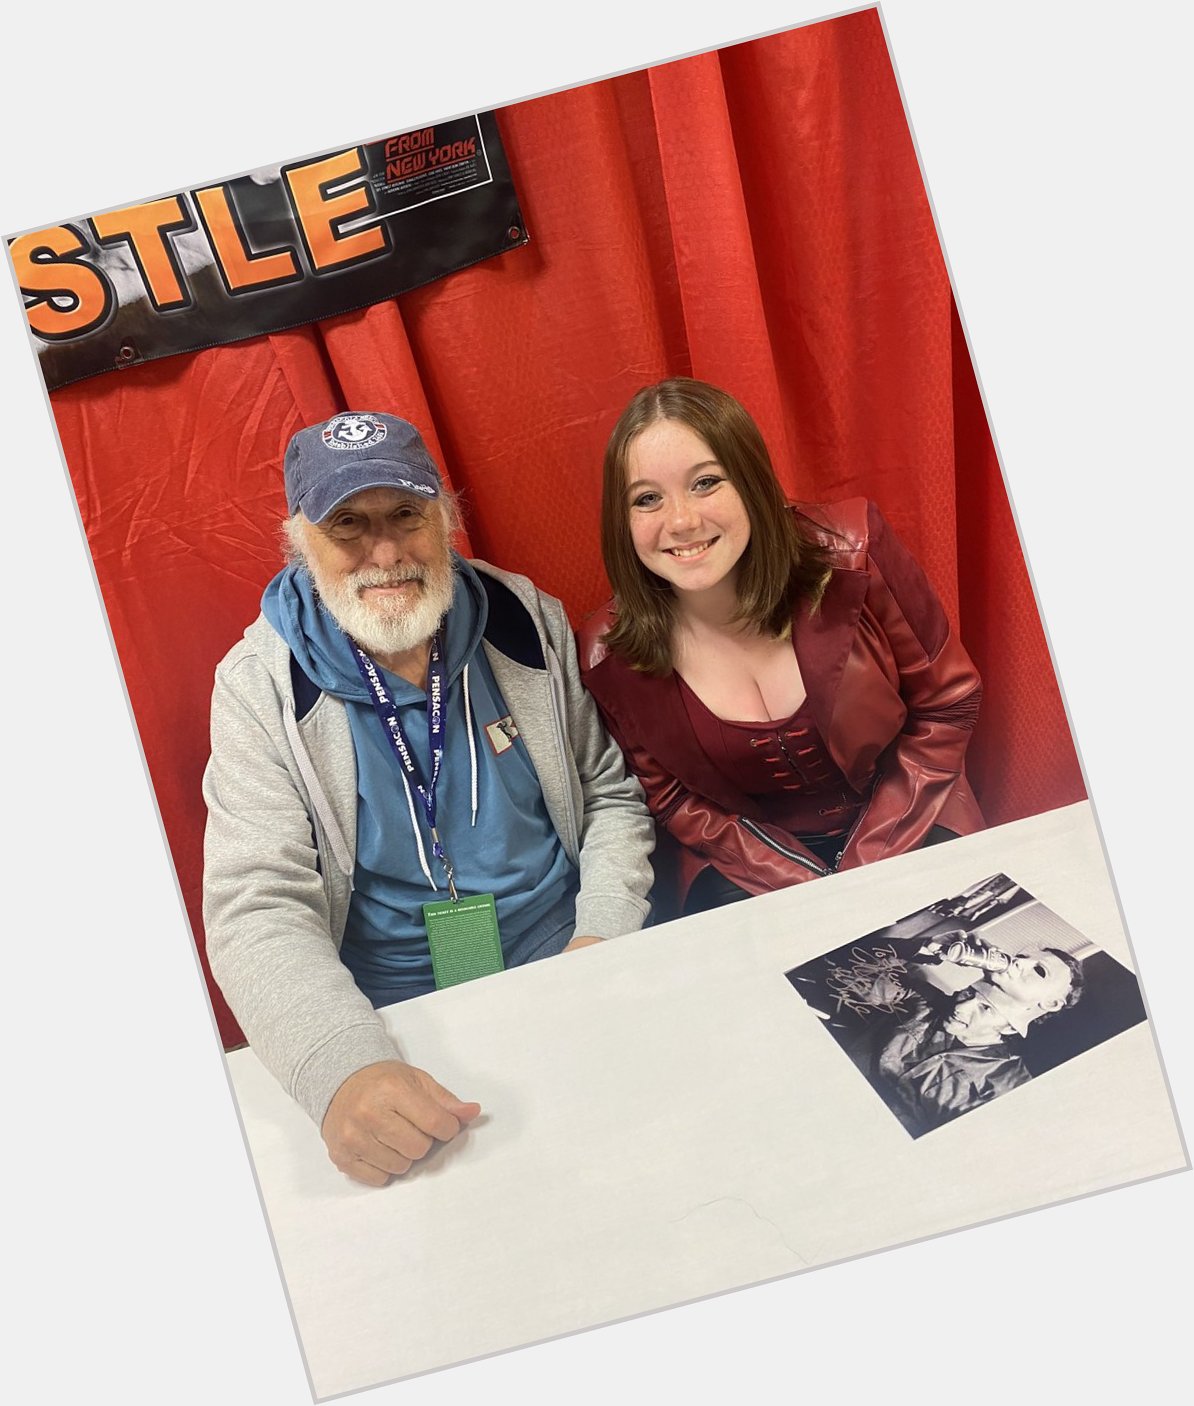 Happy Birthday Nick Castle!!! I loved meeting you at earlier this year! 